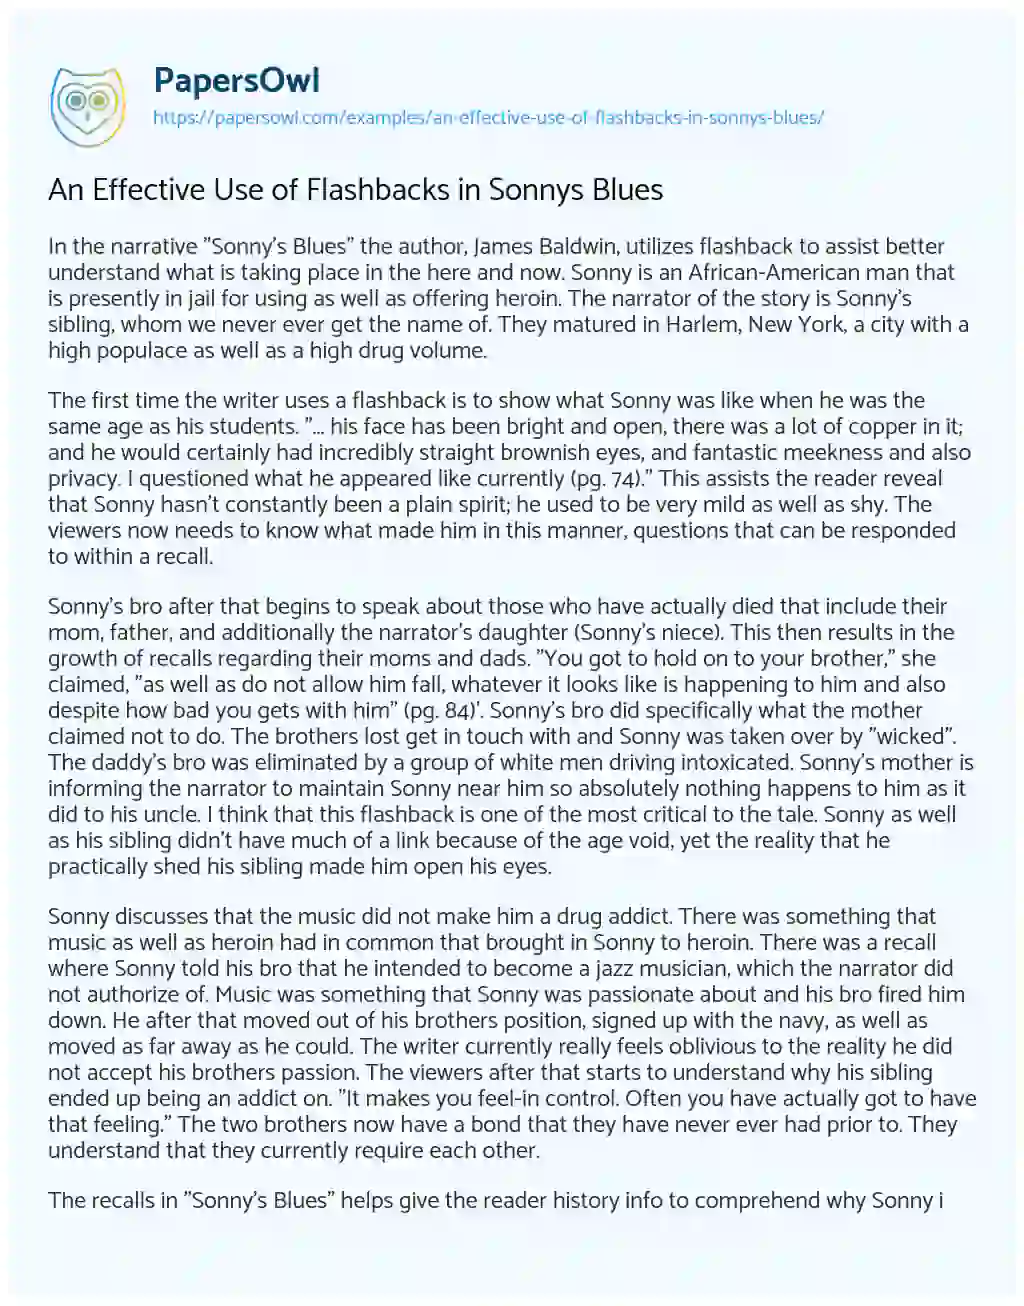 Essay on An Effective Use of Flashbacks in Sonnys Blues